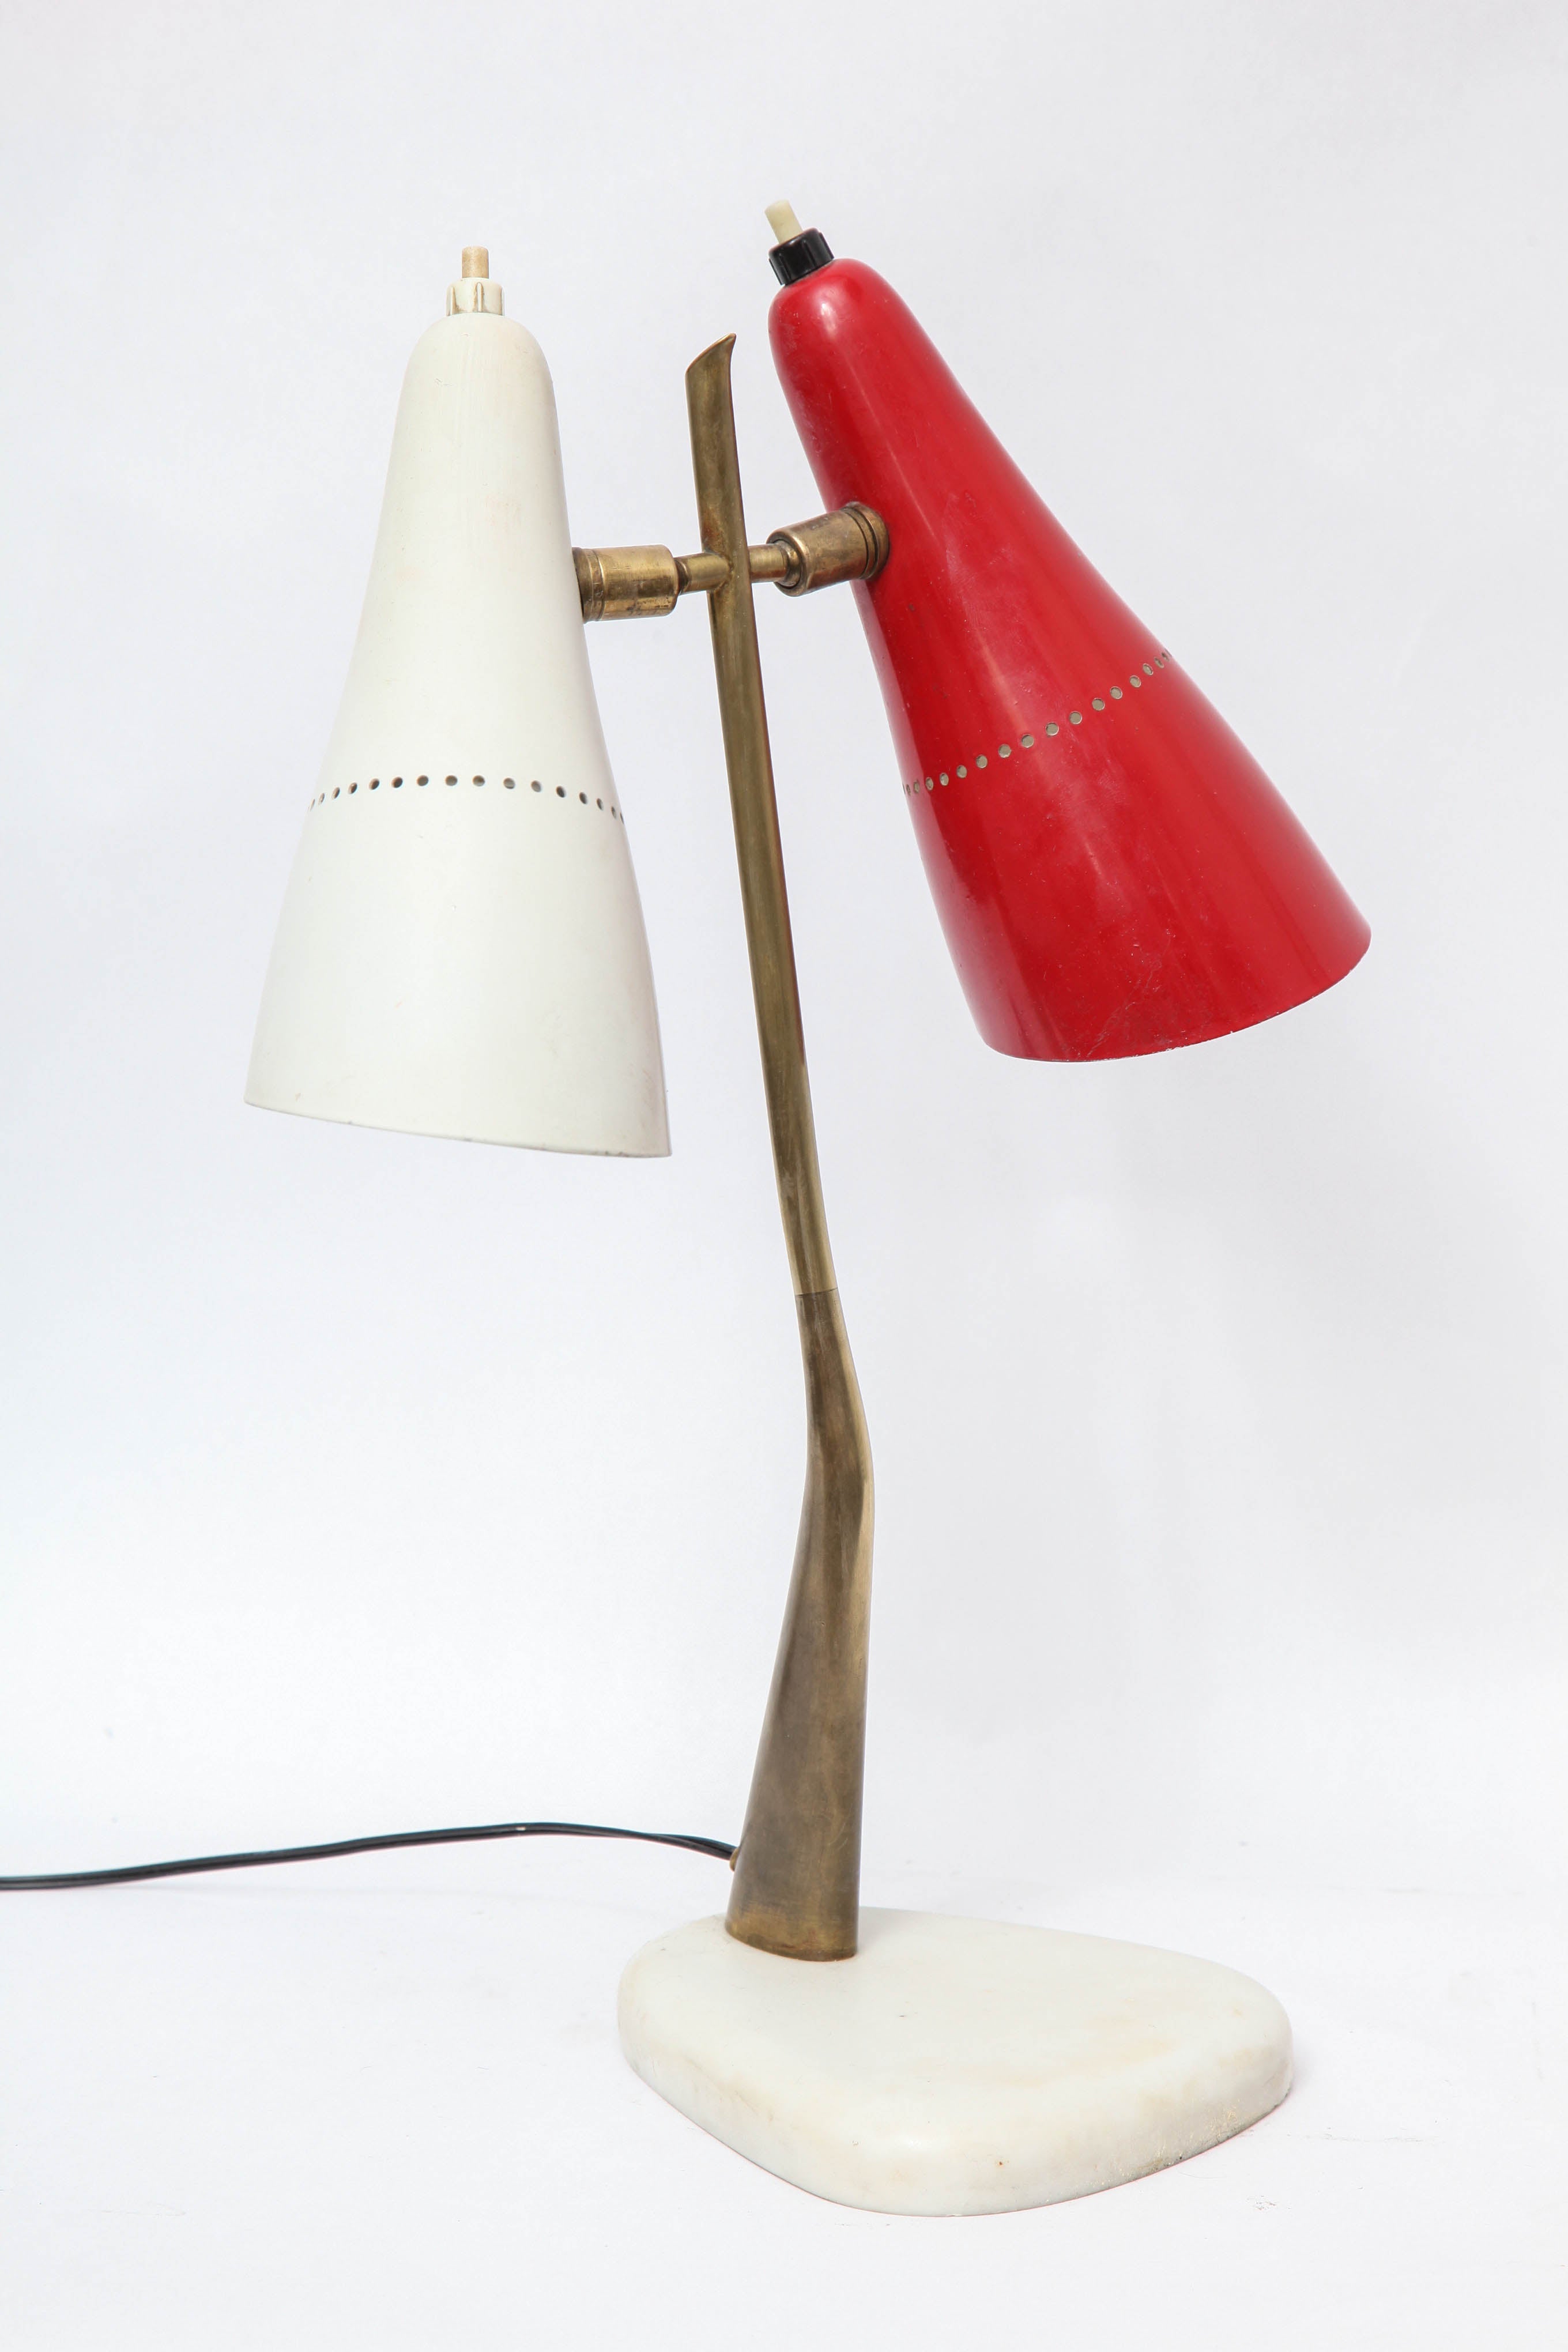 1950s Italian Articulated Table Lamp by Lumen